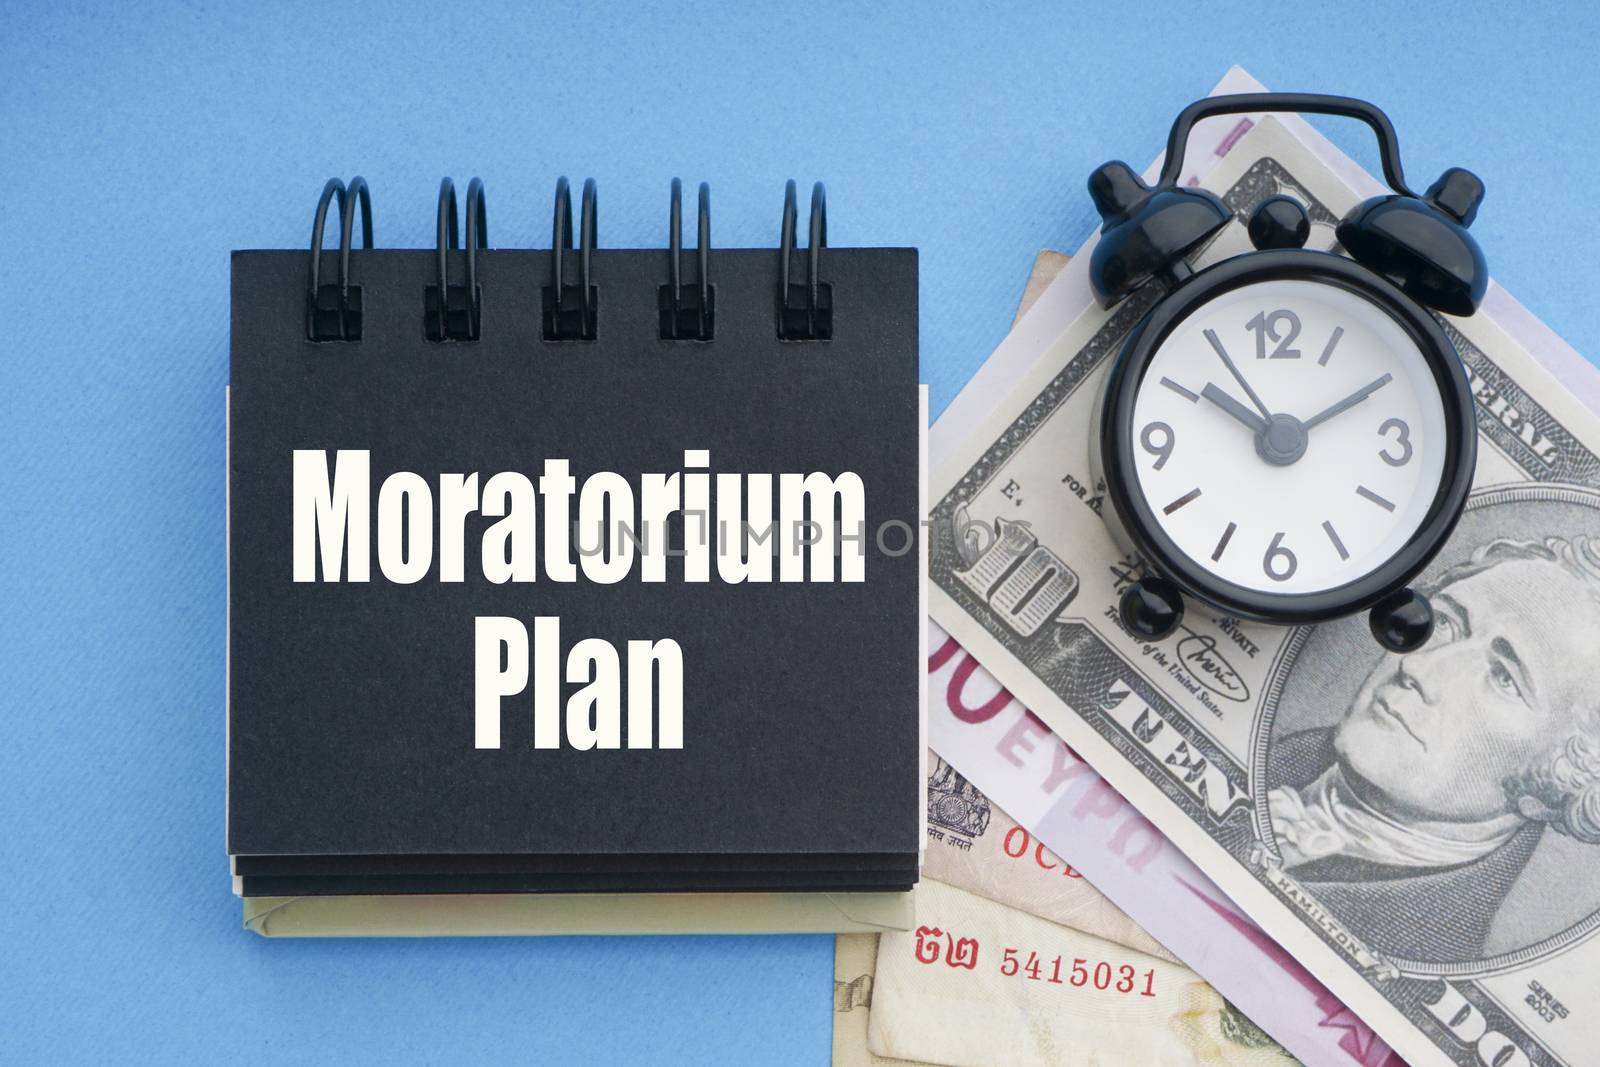 MORATORIUM PLAN text with alarm clock, banknotes currencies on blue background by silverwings